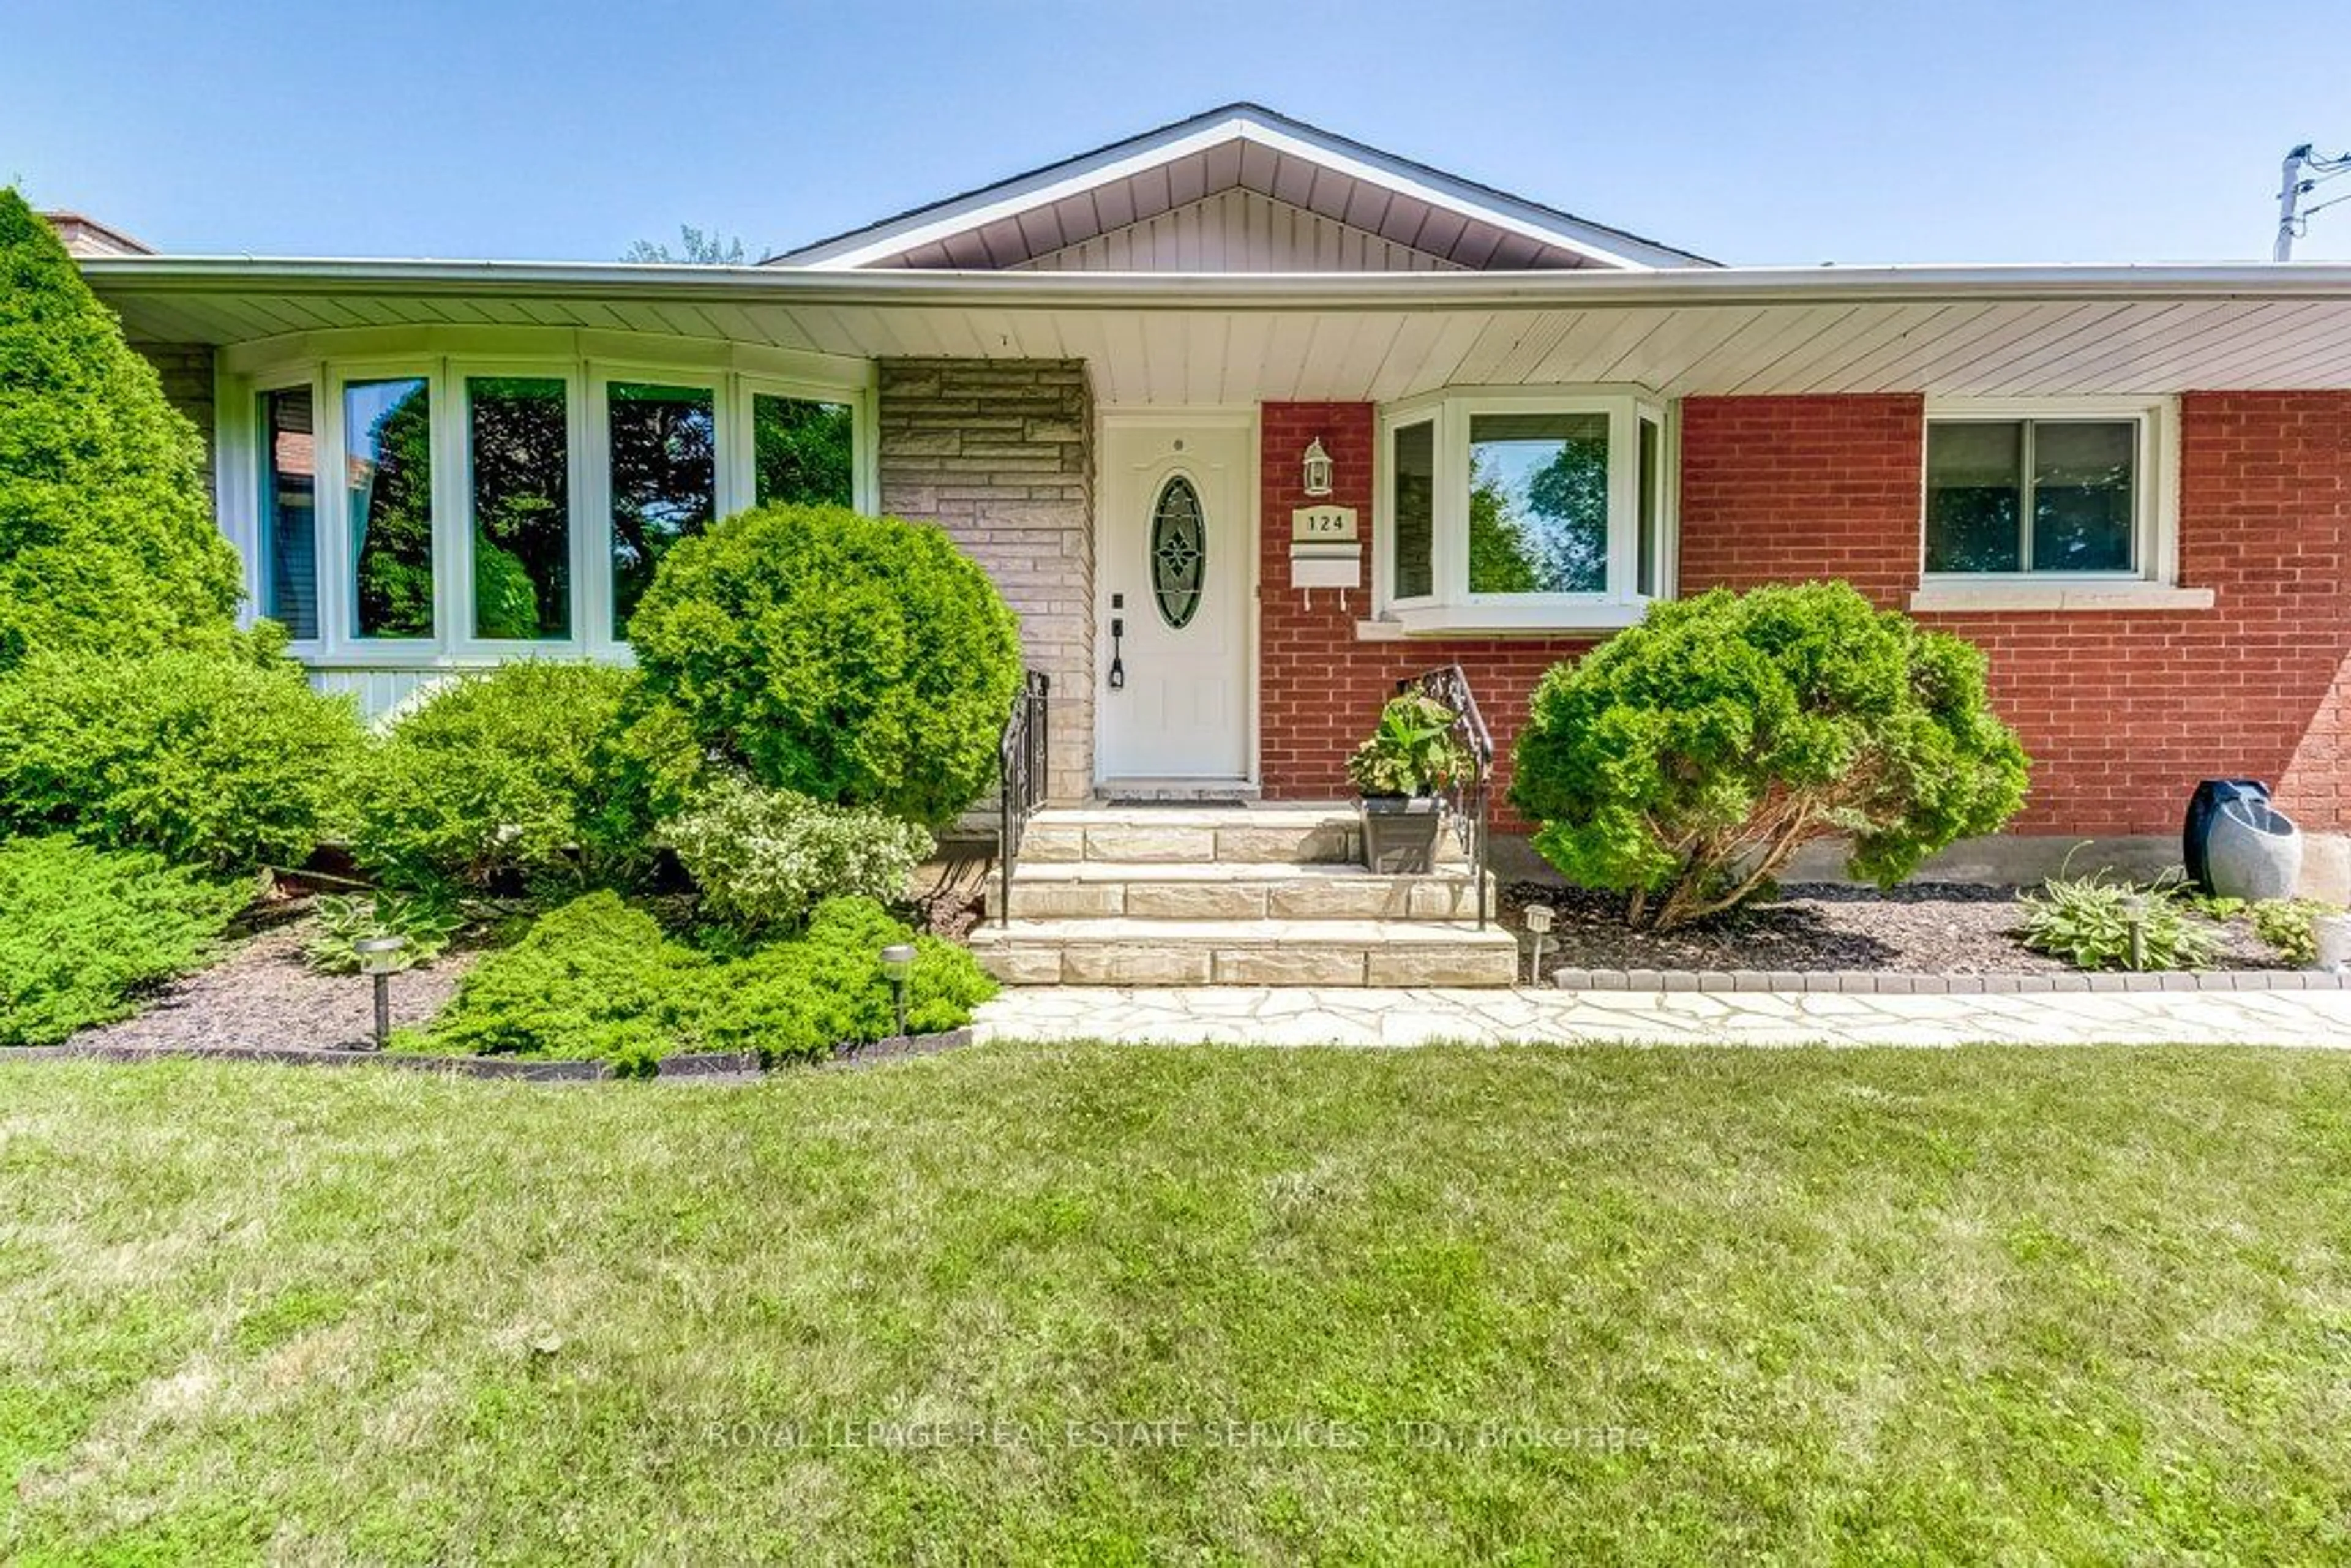 Home with brick exterior material for 124 Windward St, St. Catharines Ontario L2M 4C6